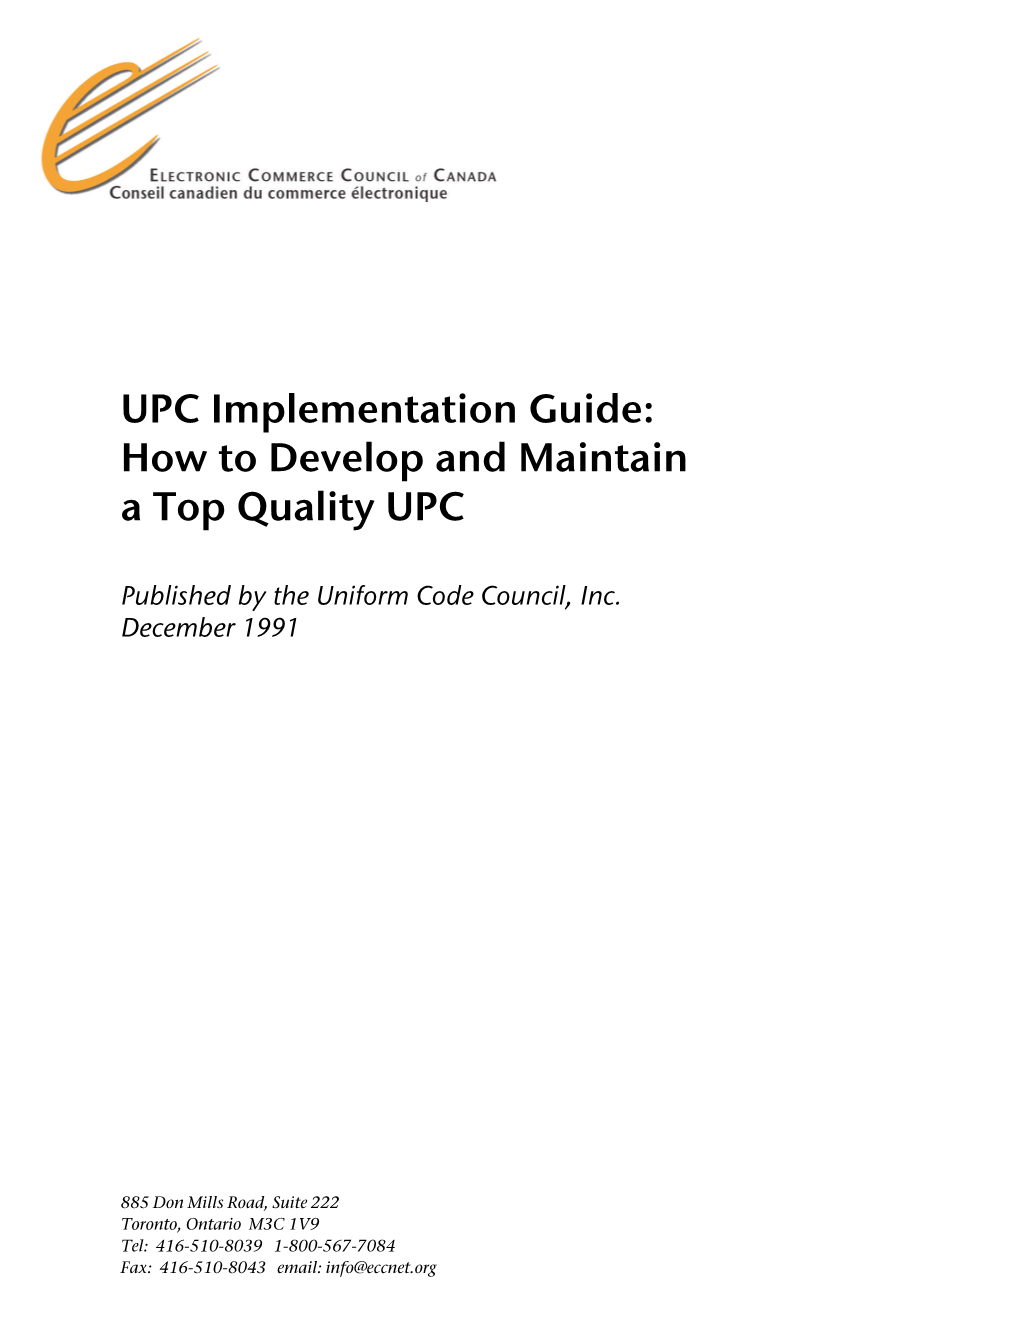 UPC Implementation Guide: How to Develop and Maintain a Top Quality UPC